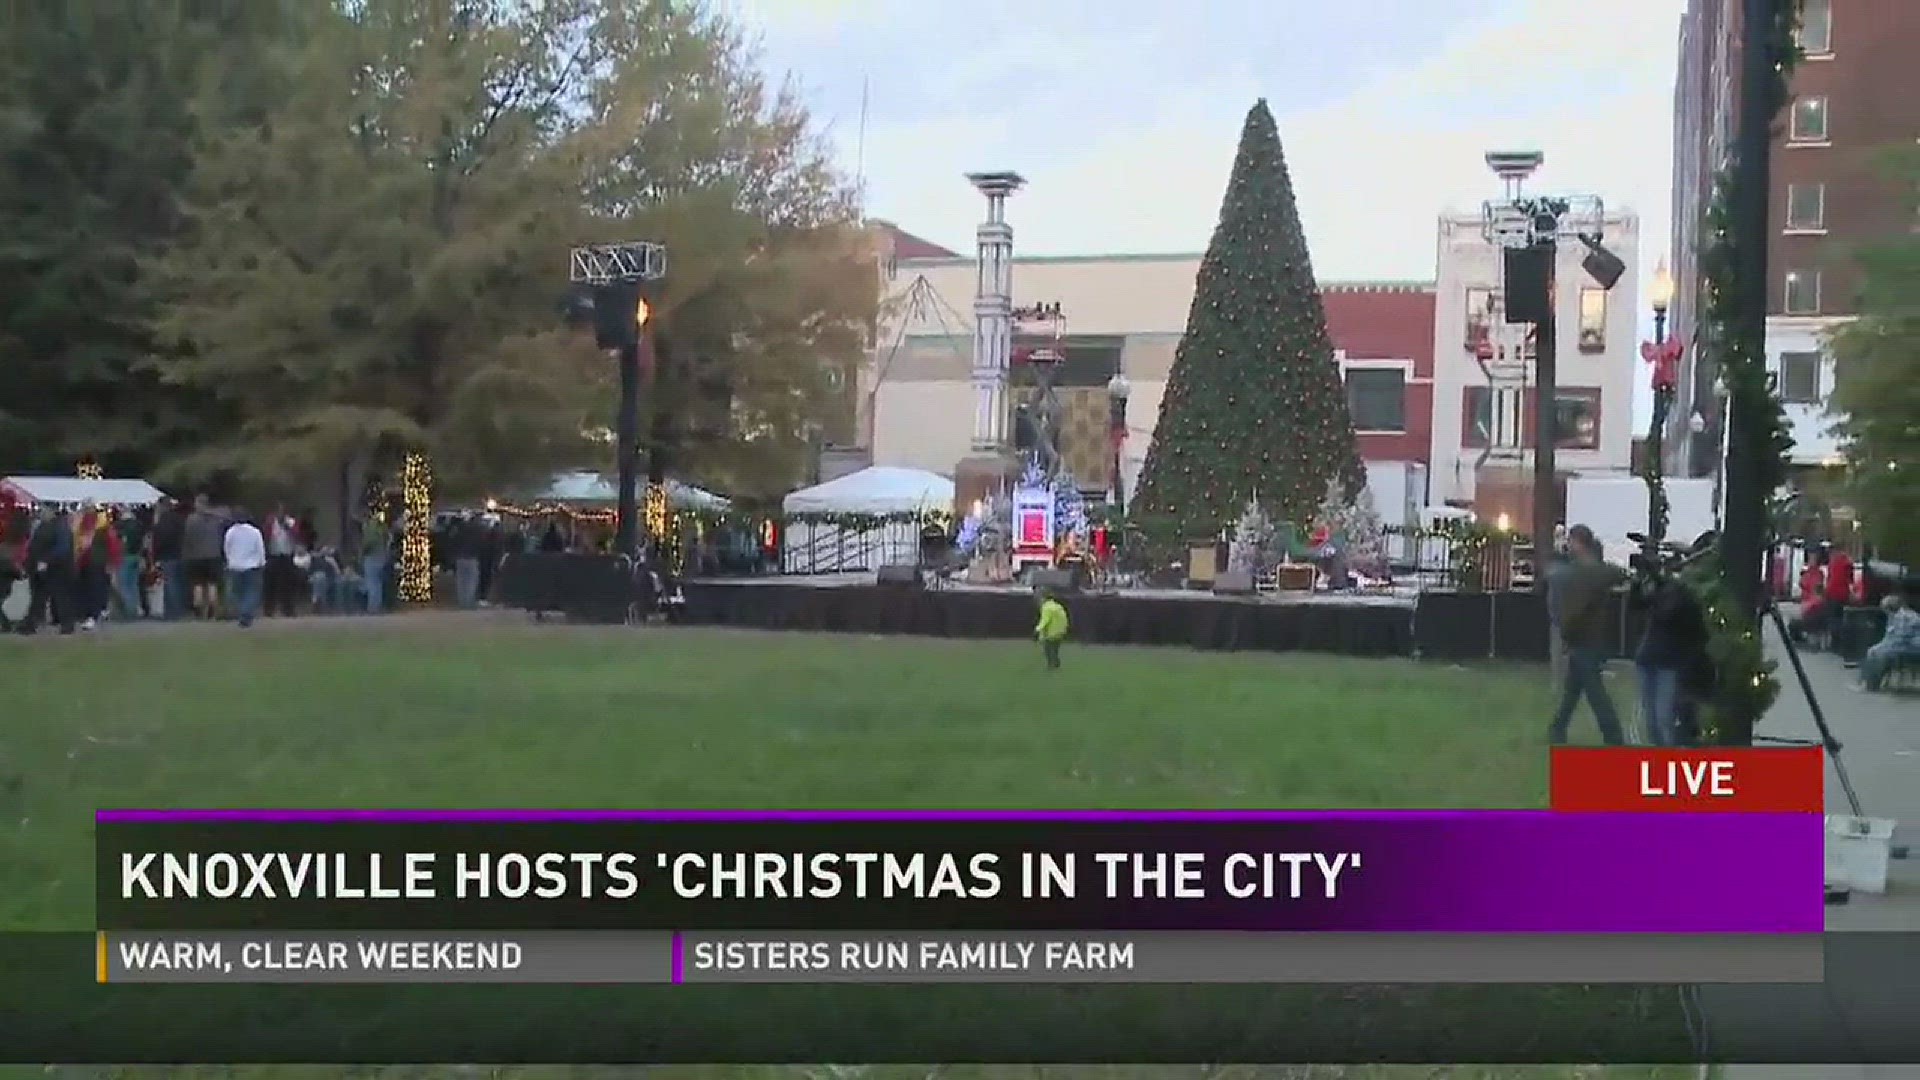 10 News reporter Rachel Downs gives a preview of the City of Knoxville's "Christmas in the City." Holiday-themed events will last until 9 p.m. downtown in Market Square and Krutch Park. November 25, 2016.